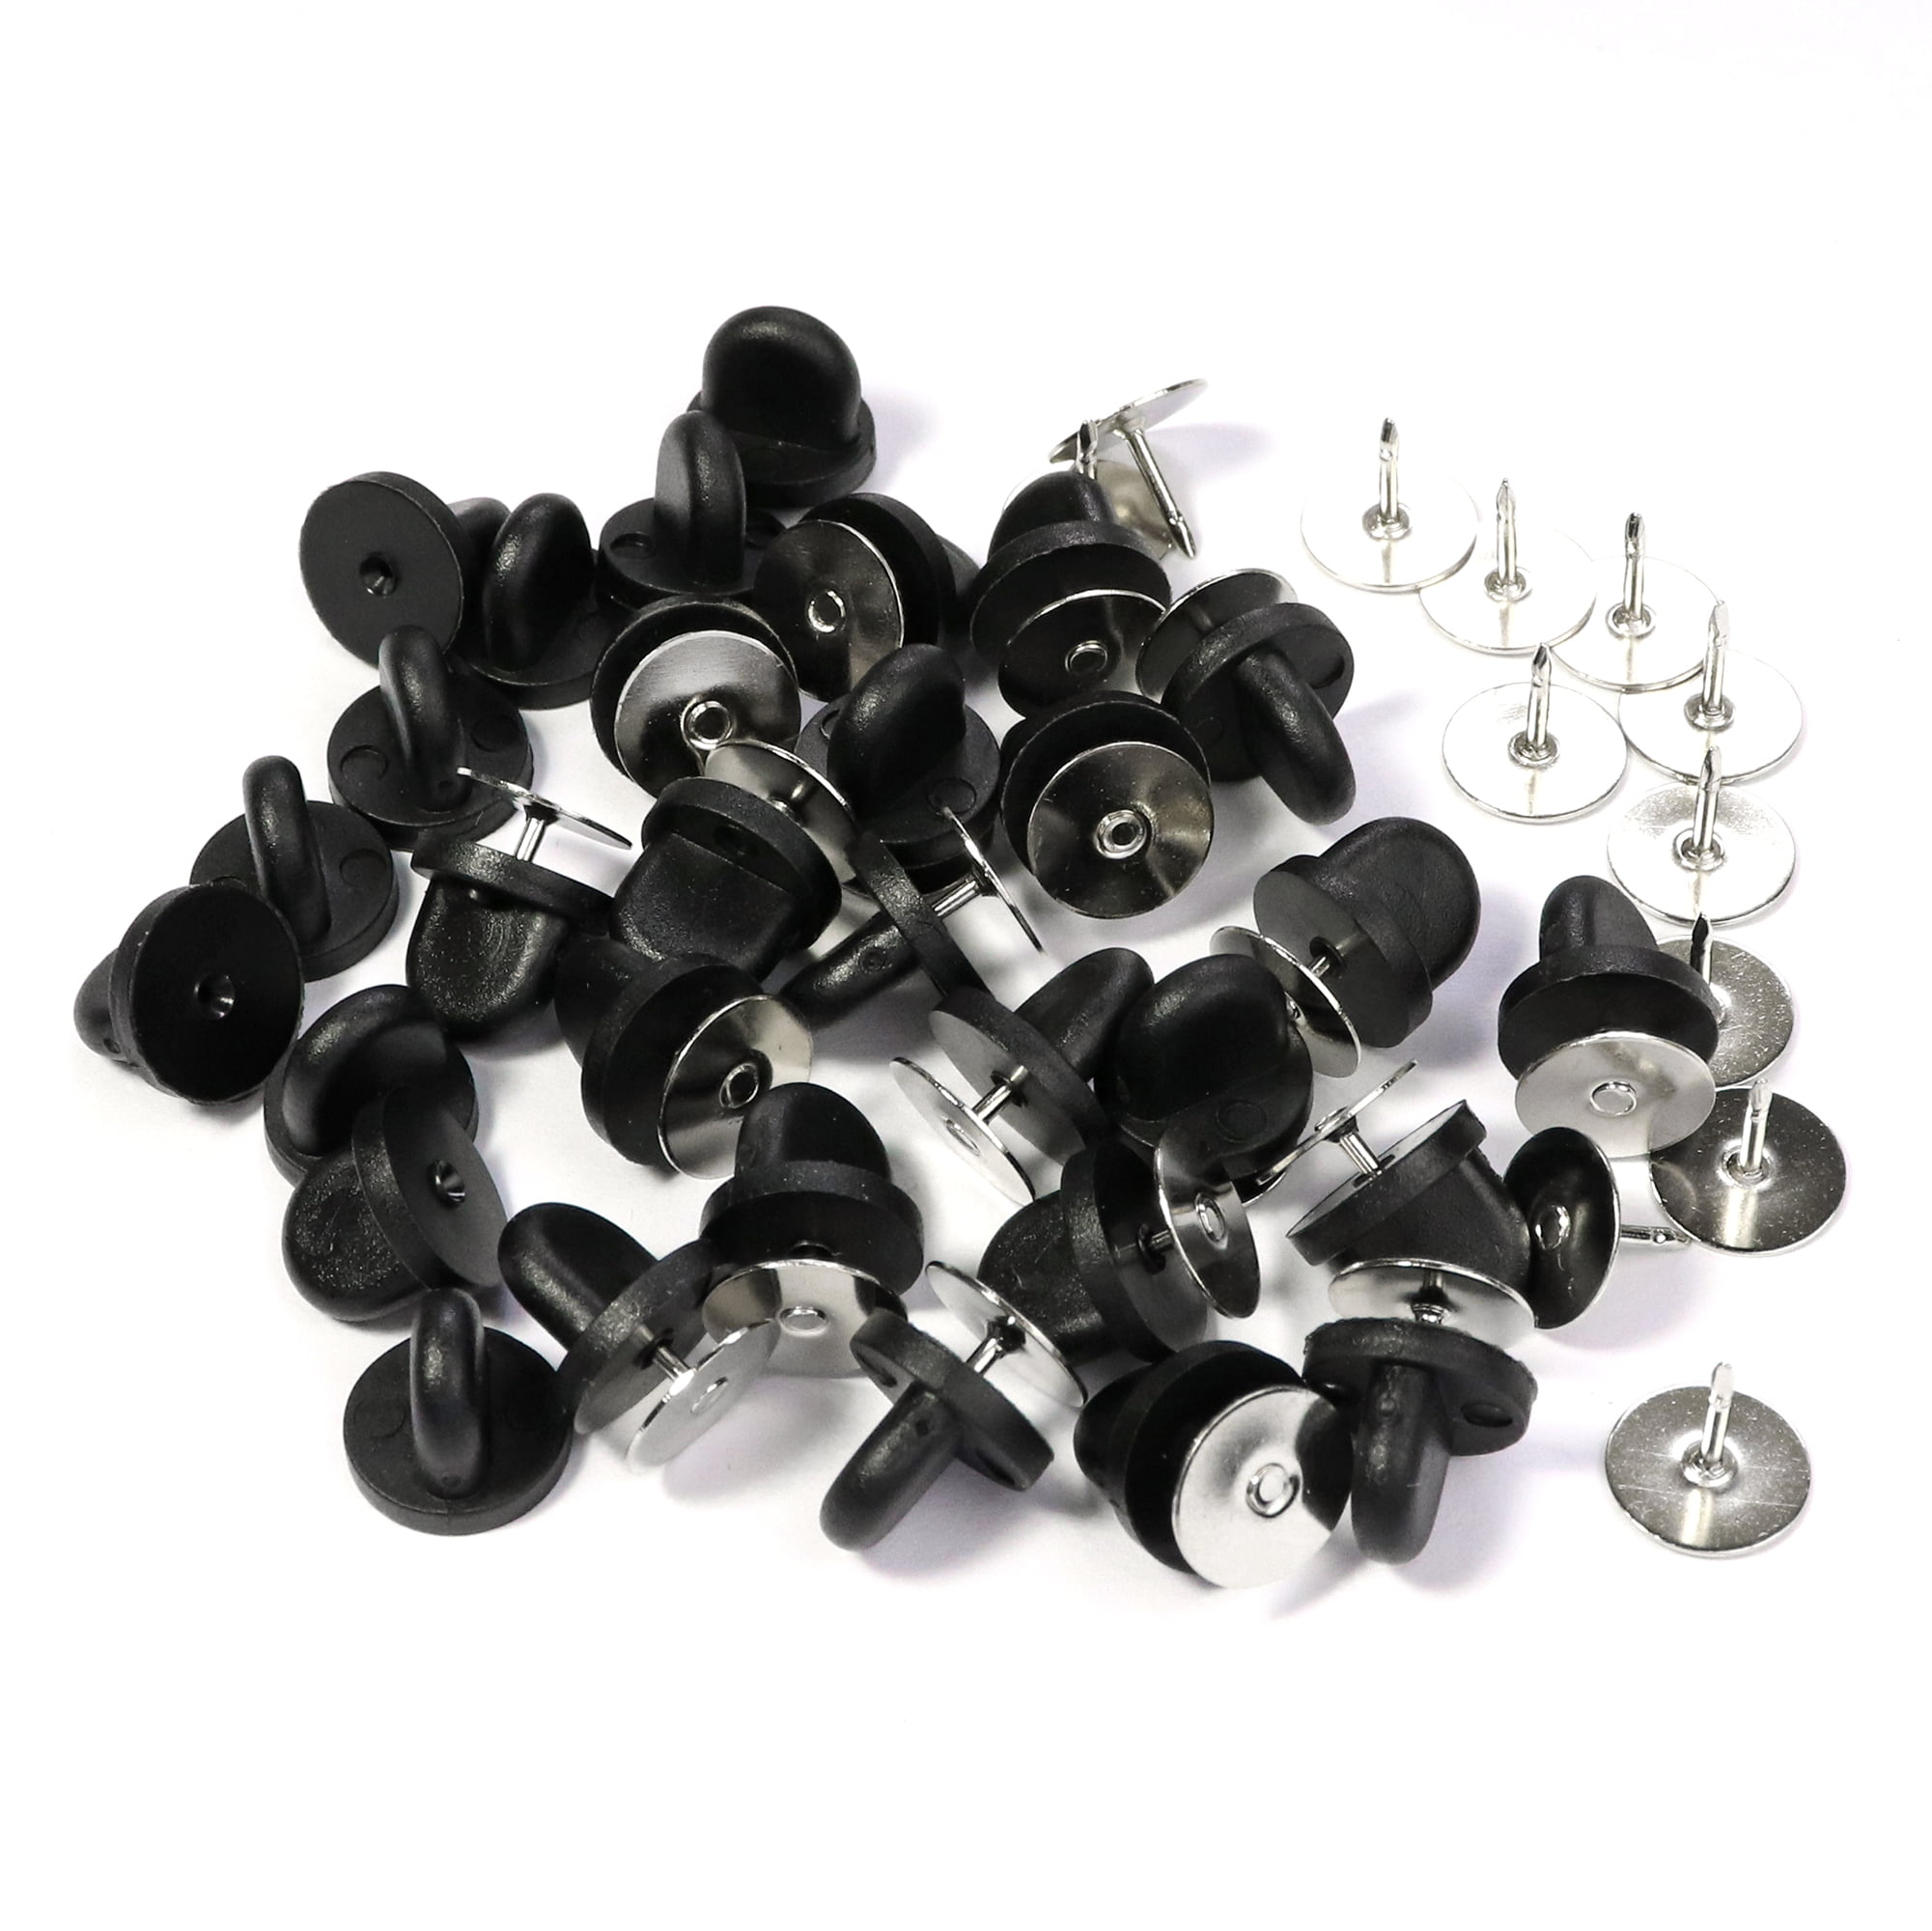 50 Pieces 10mm And 15mm Copper Tie Tacks Blank Pins With 50 Pieces Pvc  Rubber Pi